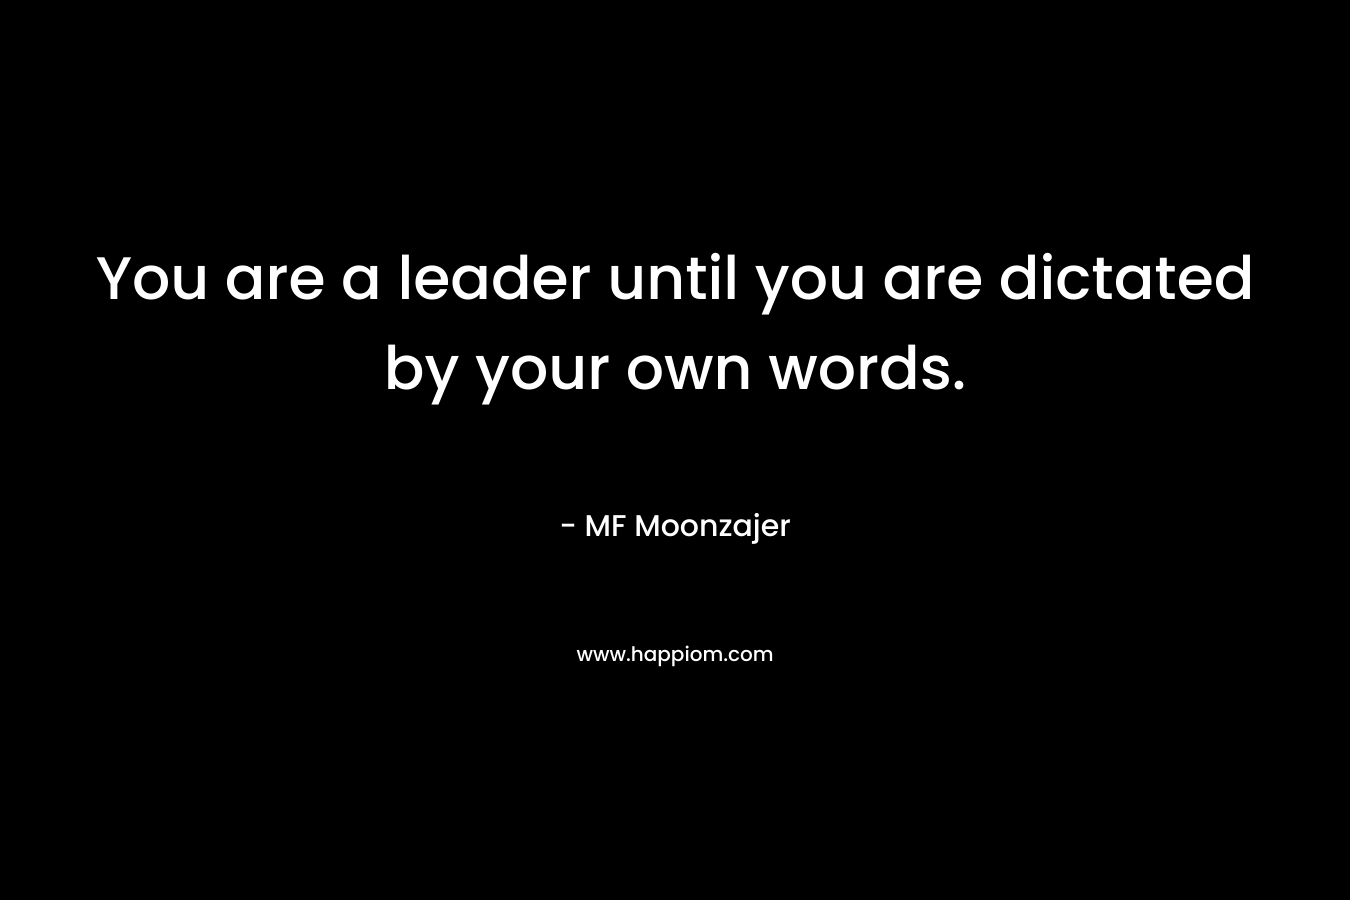 You are a leader until you are dictated by your own words. – MF Moonzajer